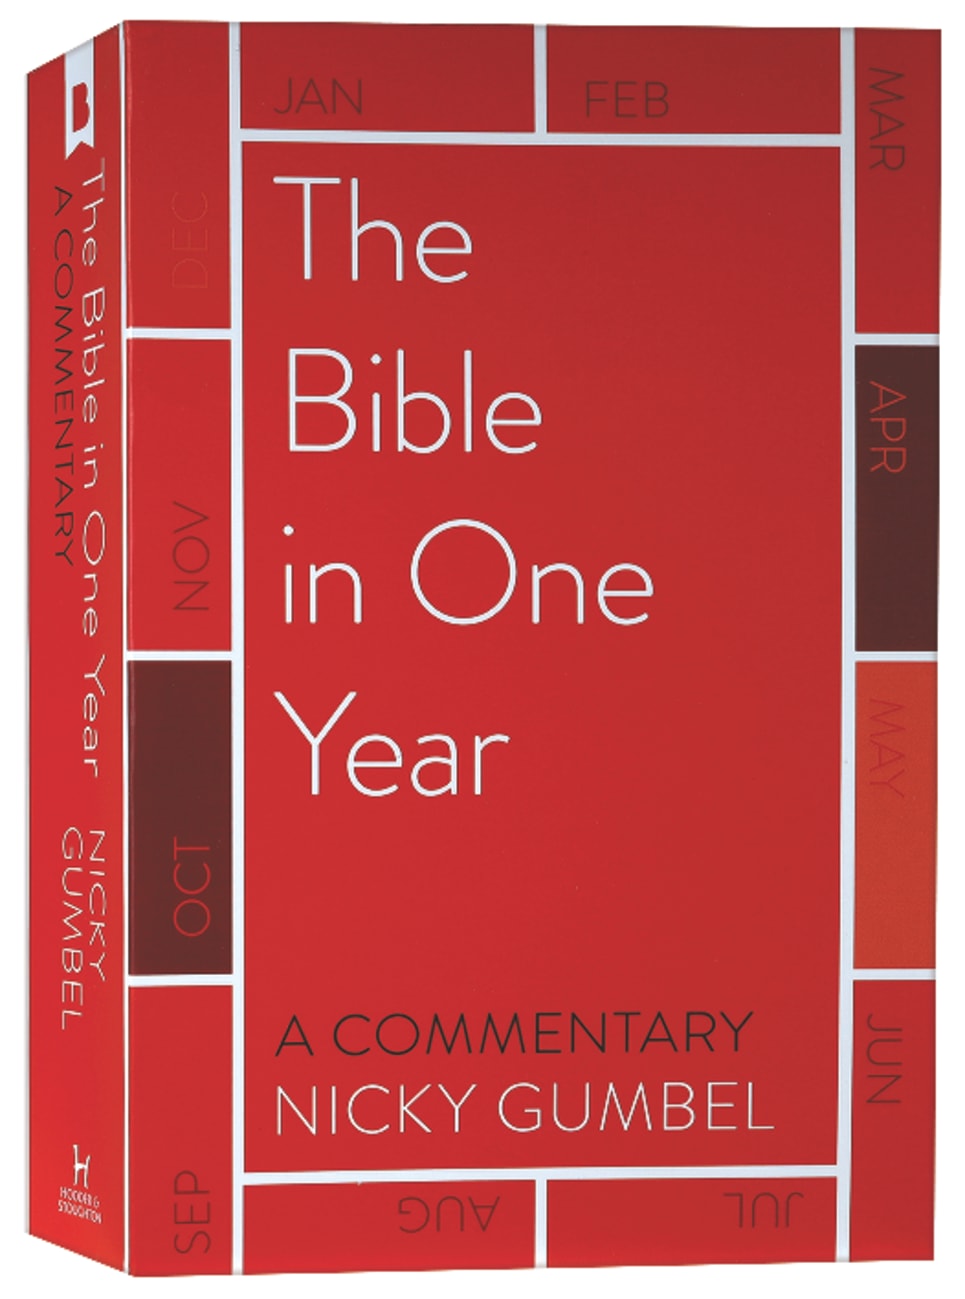 The Bible in One Year by Nicky Gumbel Koorong